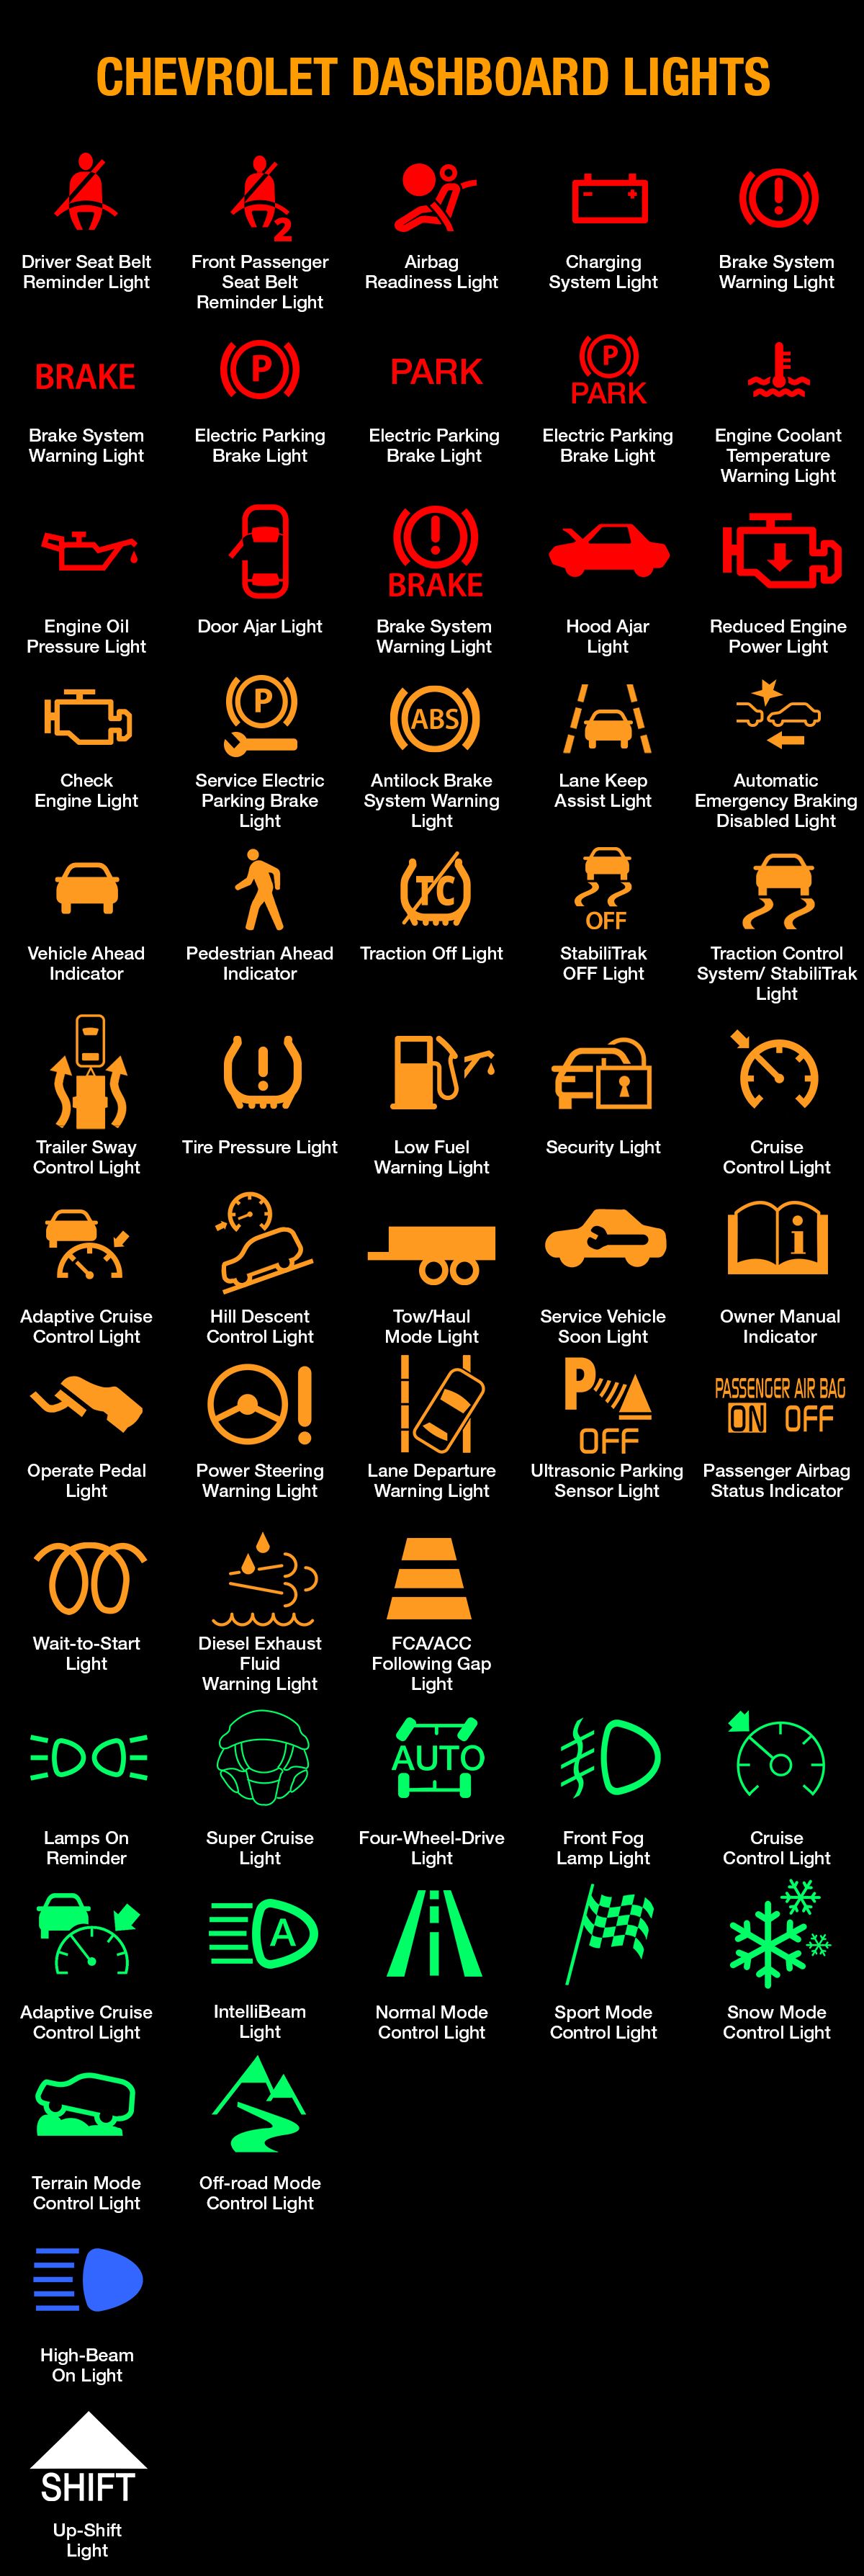 Chevy Dashboard Symbols and Meanings (FULL List, FREE Download) - OBD ...